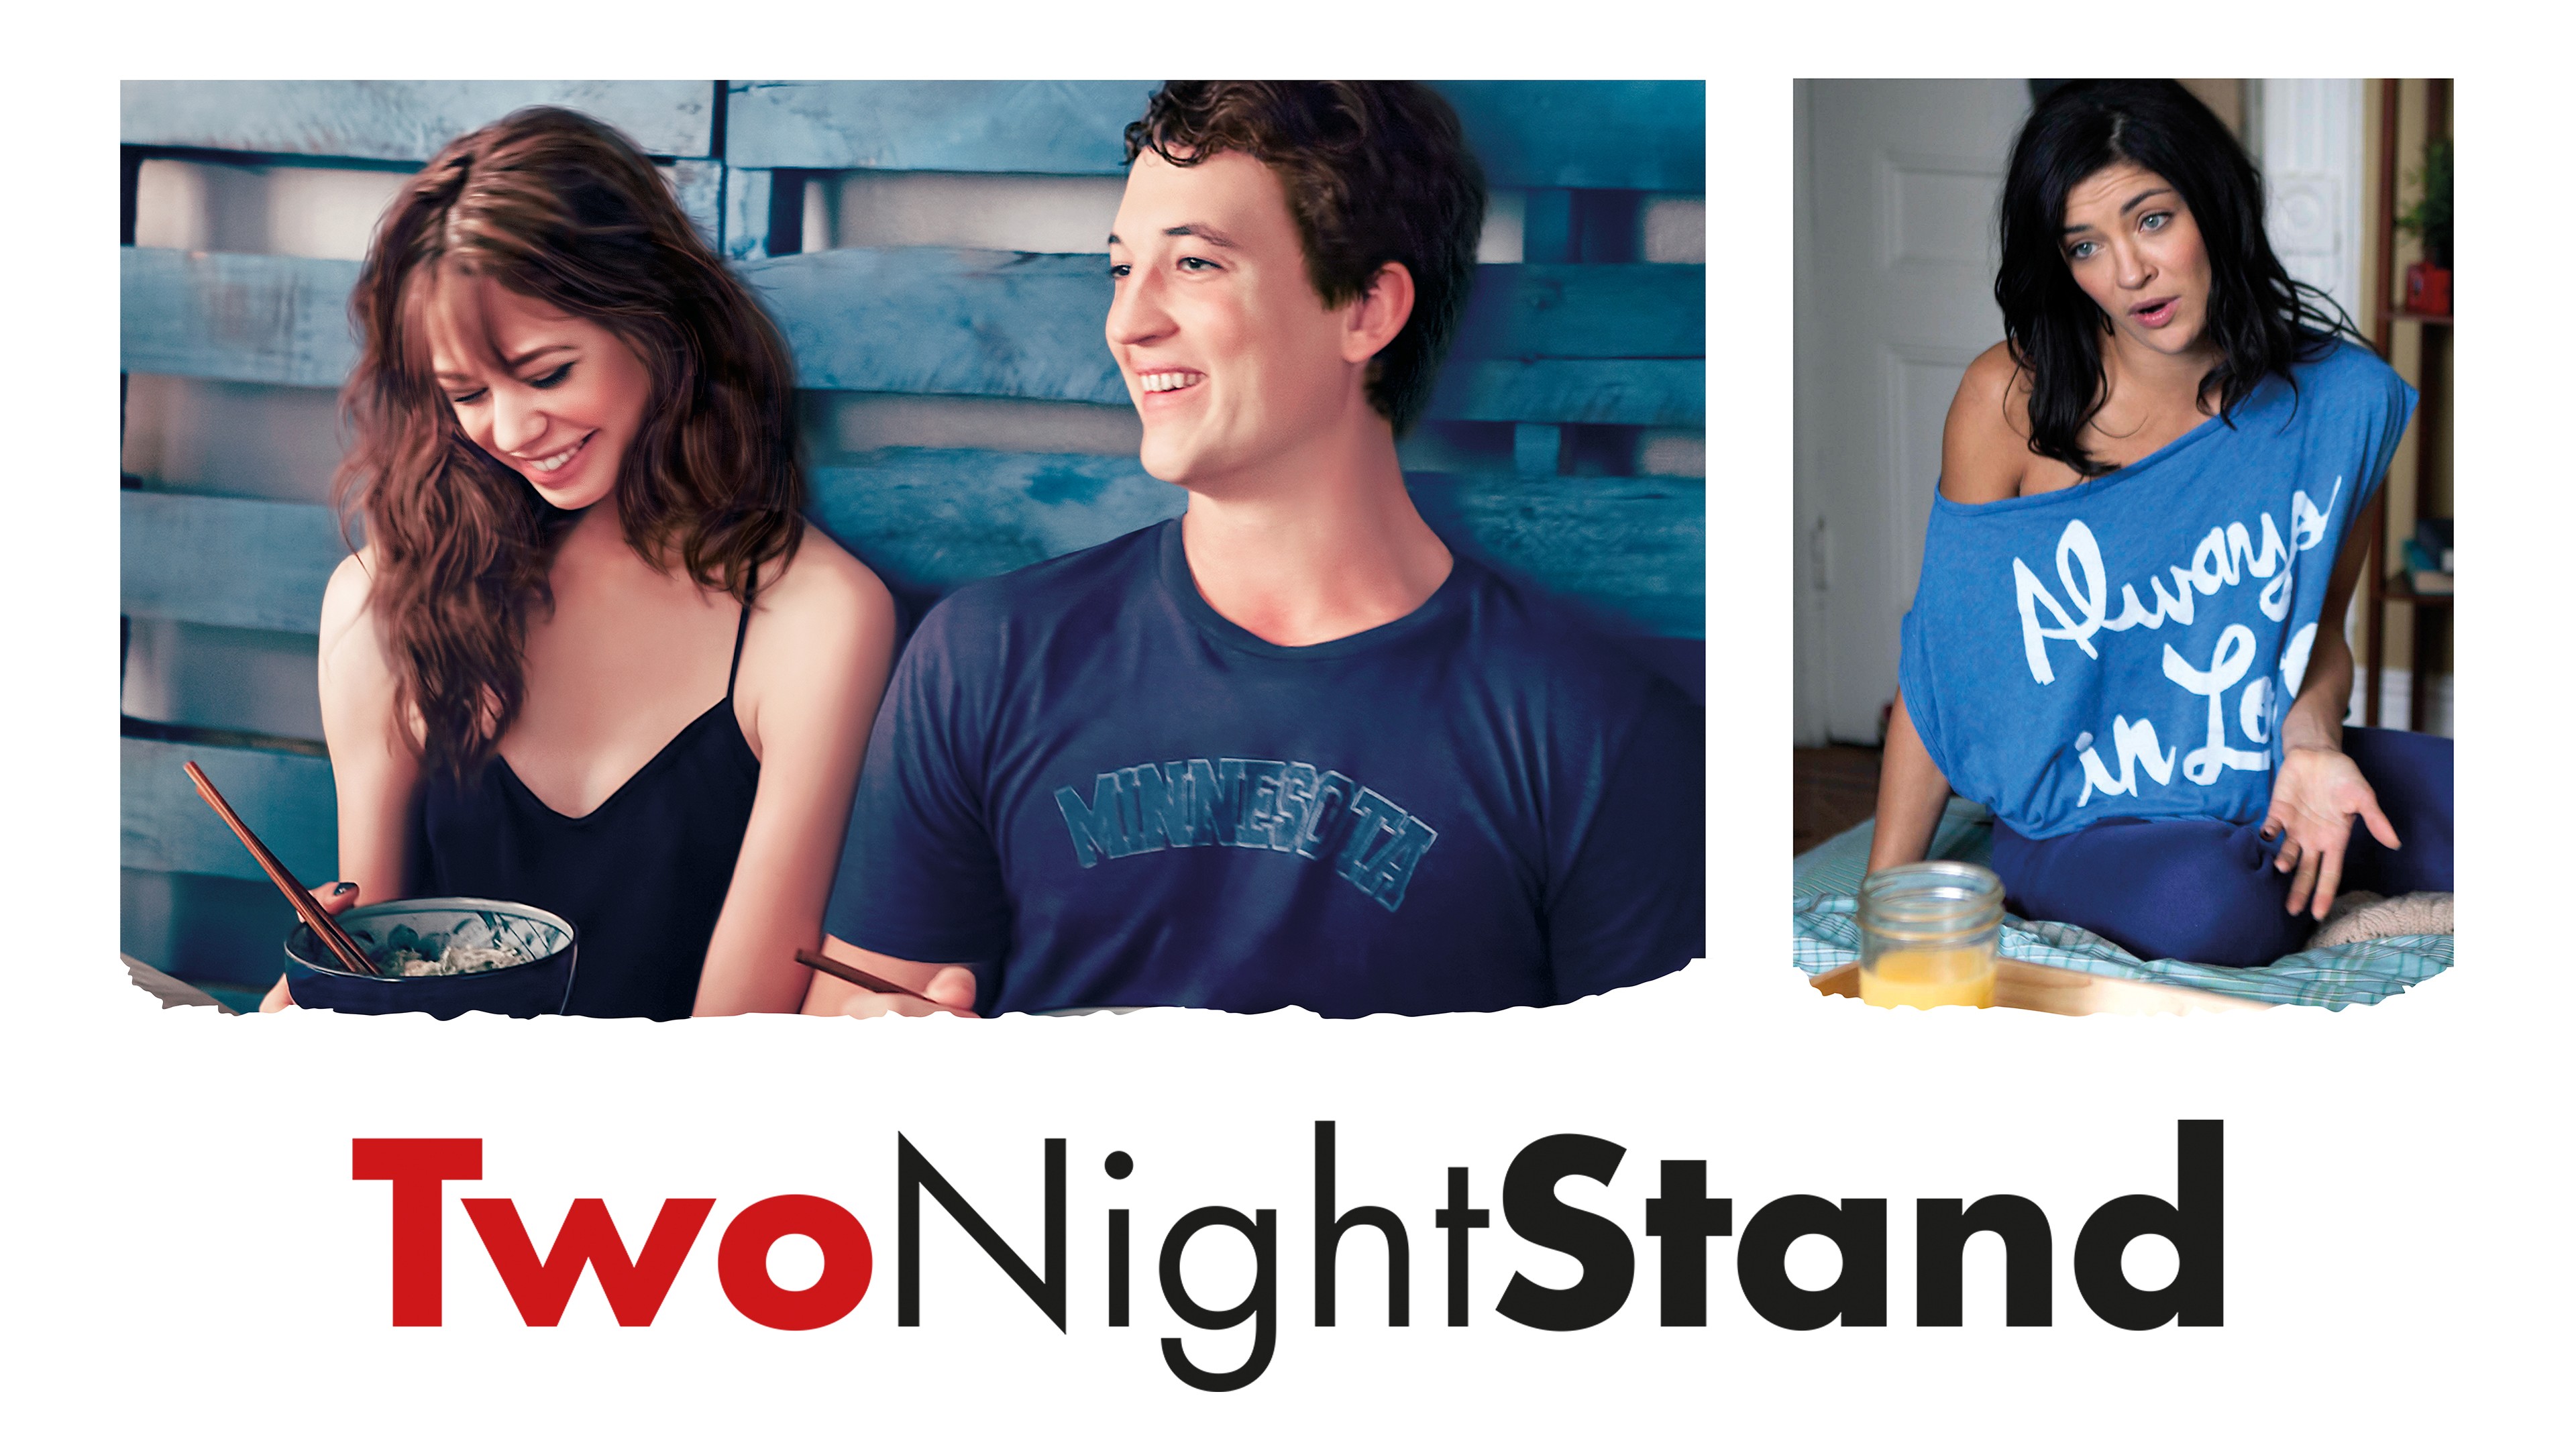 Two Night Stand' movie review: Not exactly what you'd expect - The